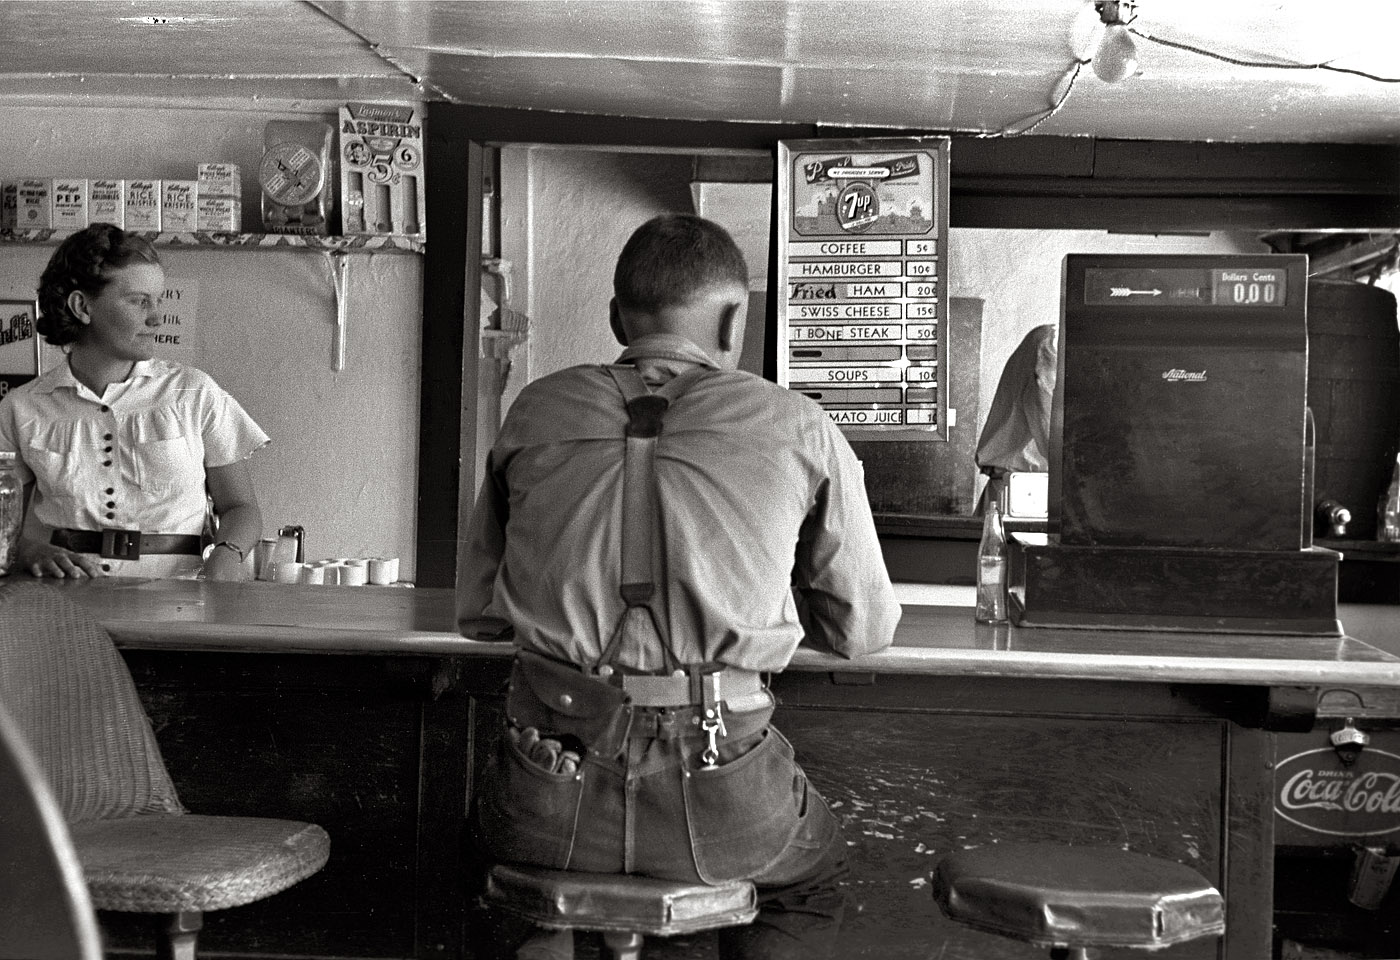 May 1939. "Man in hamburger stand. Alpine, Texas." View full size. 35mm nitrate negative by Russell Lee for the Farm Security Administration.